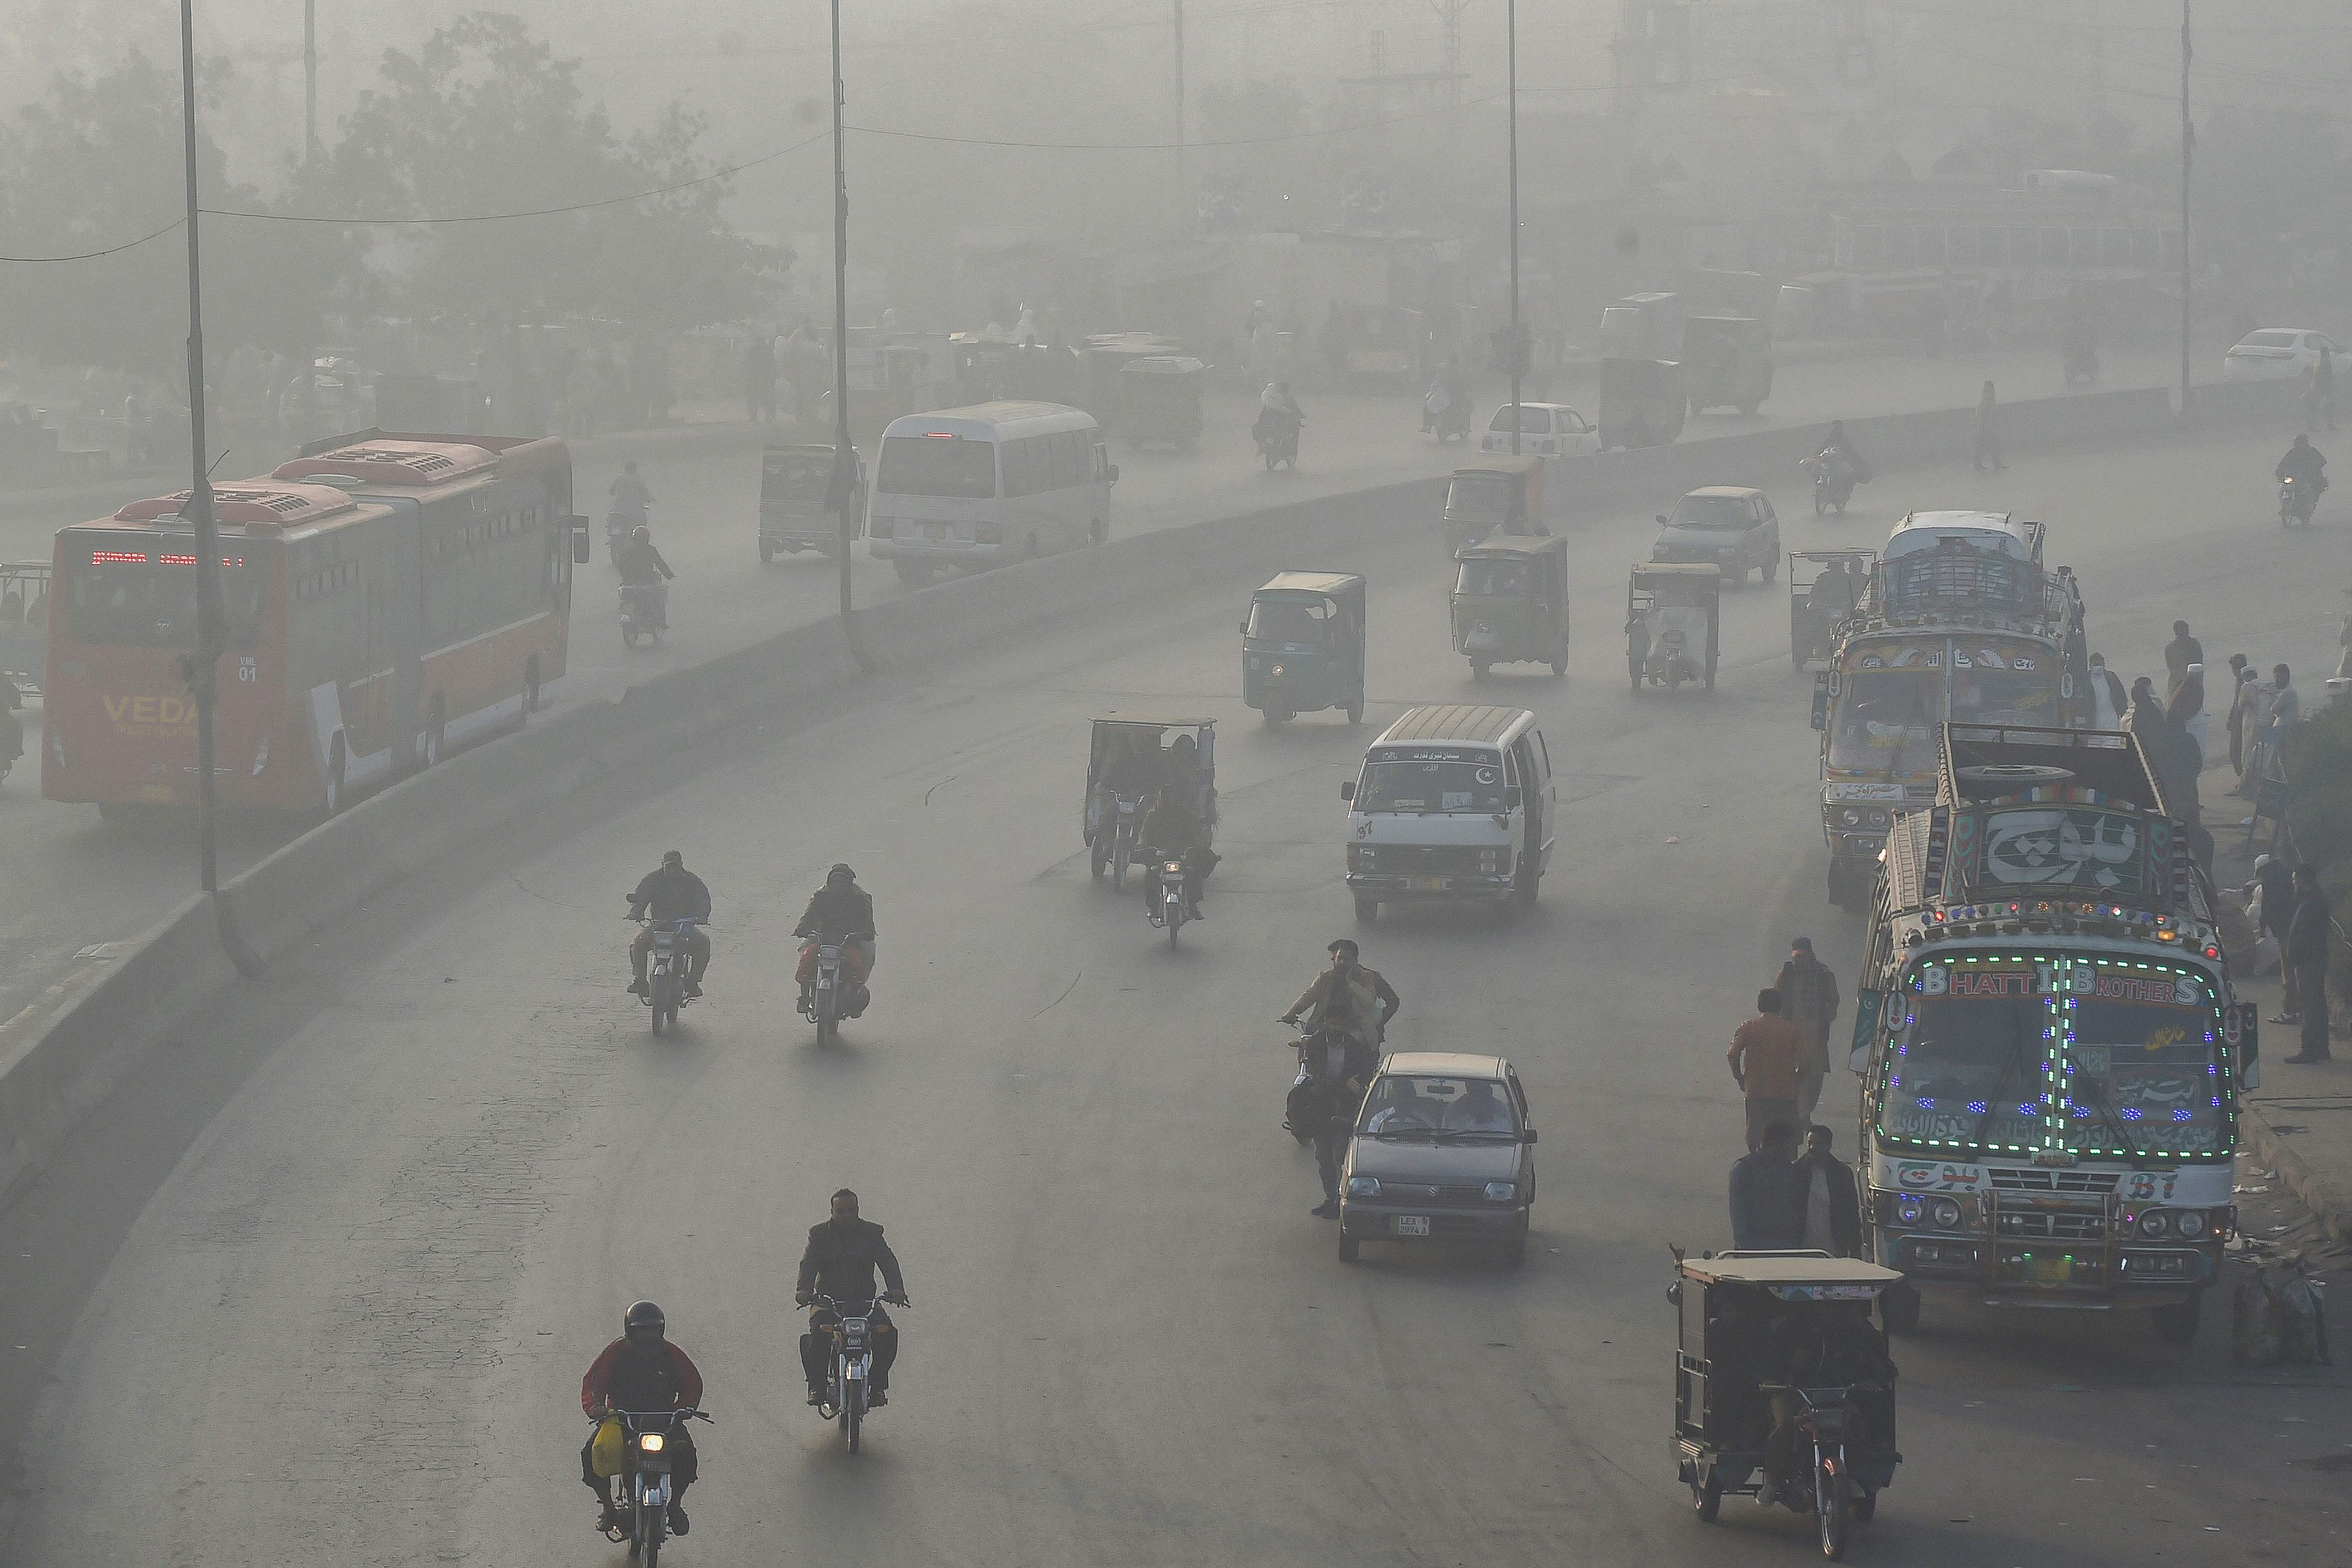 In this picture taken on 24 November 2021, commuters make their way along a road amid smoggy conditions in Lahore